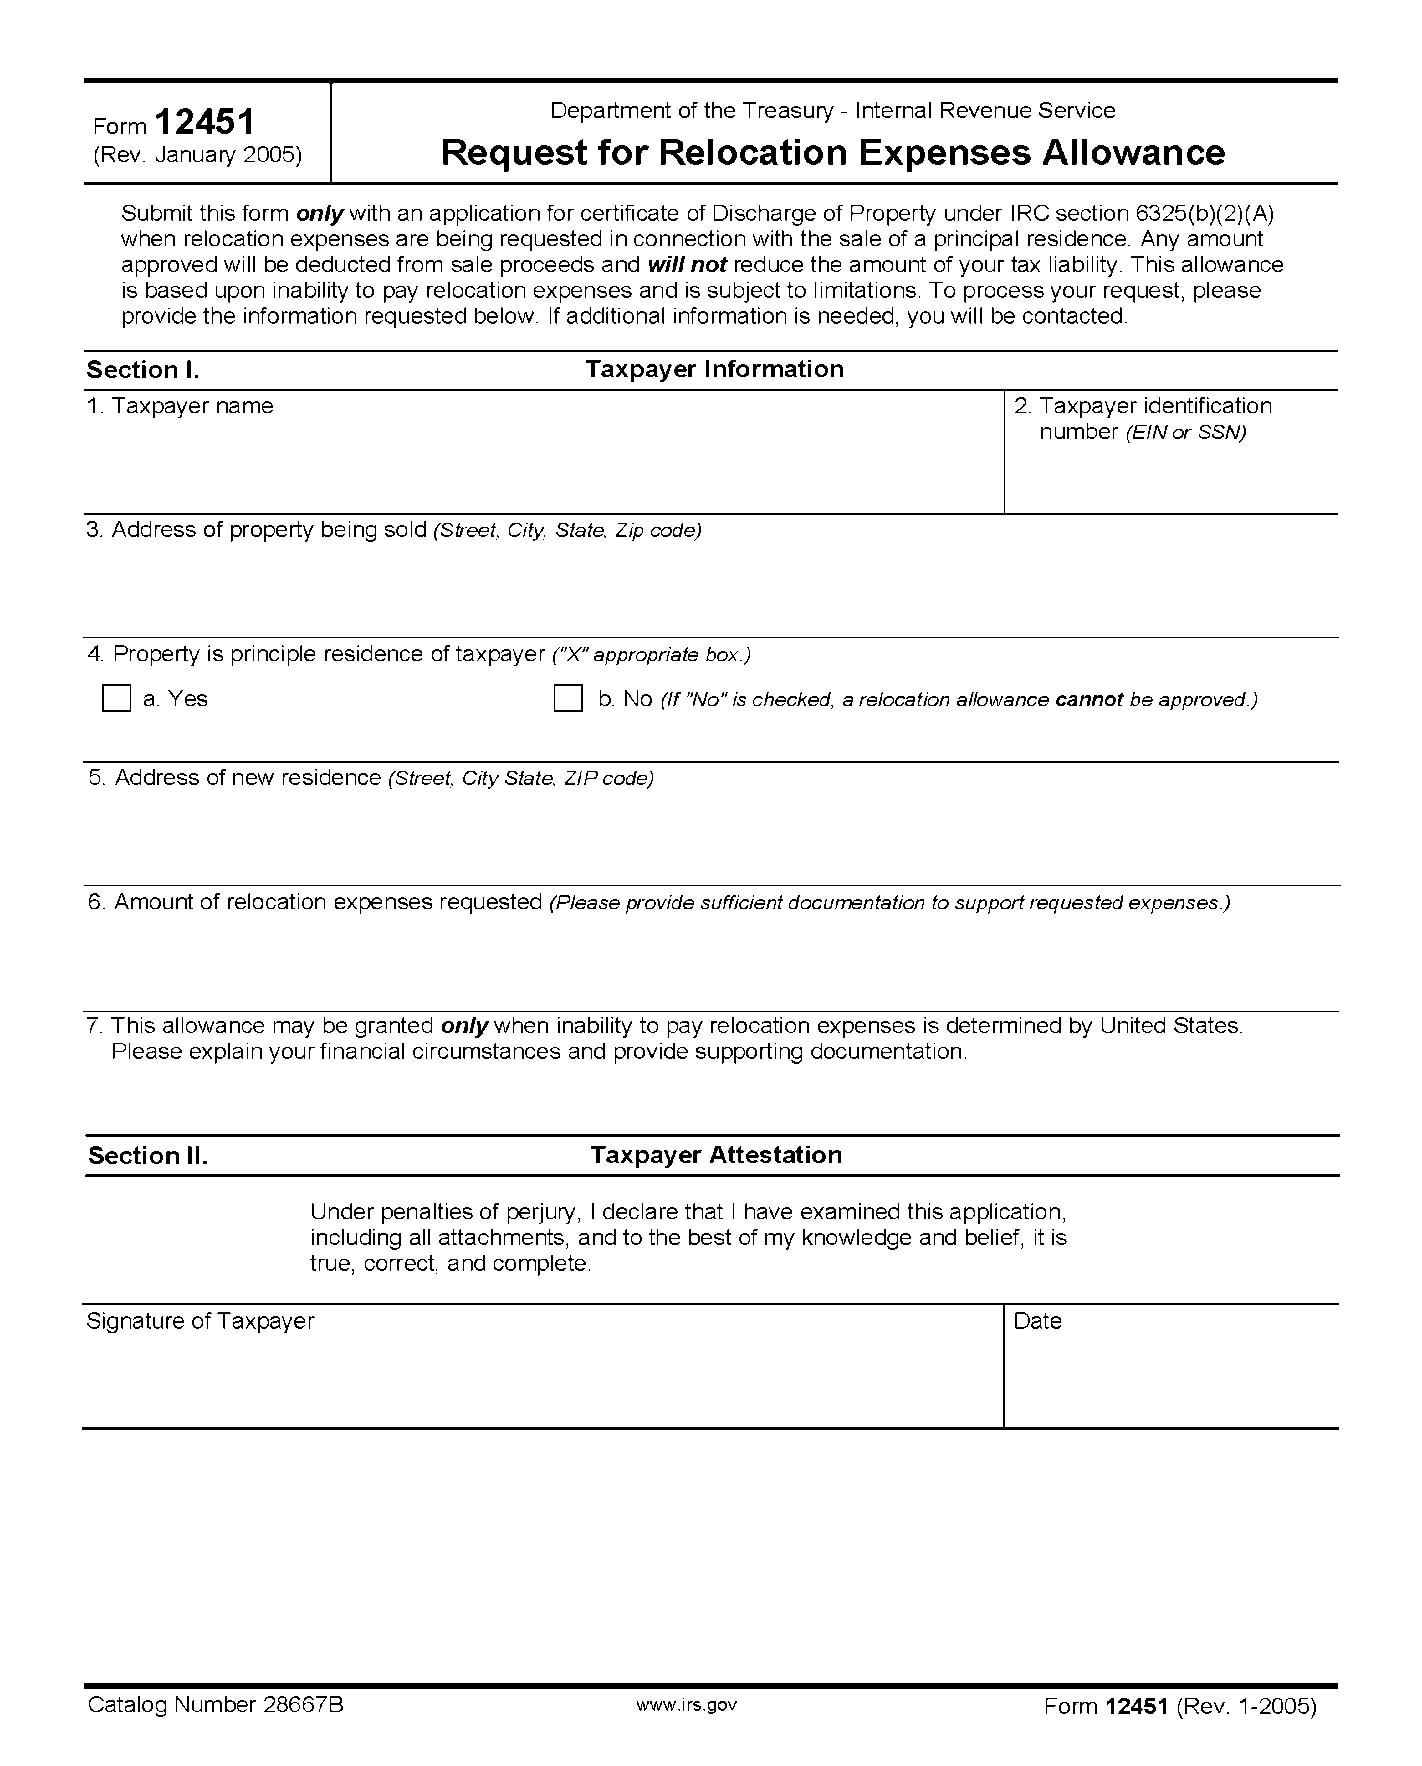 Sample Form - Request for Employee Relocation